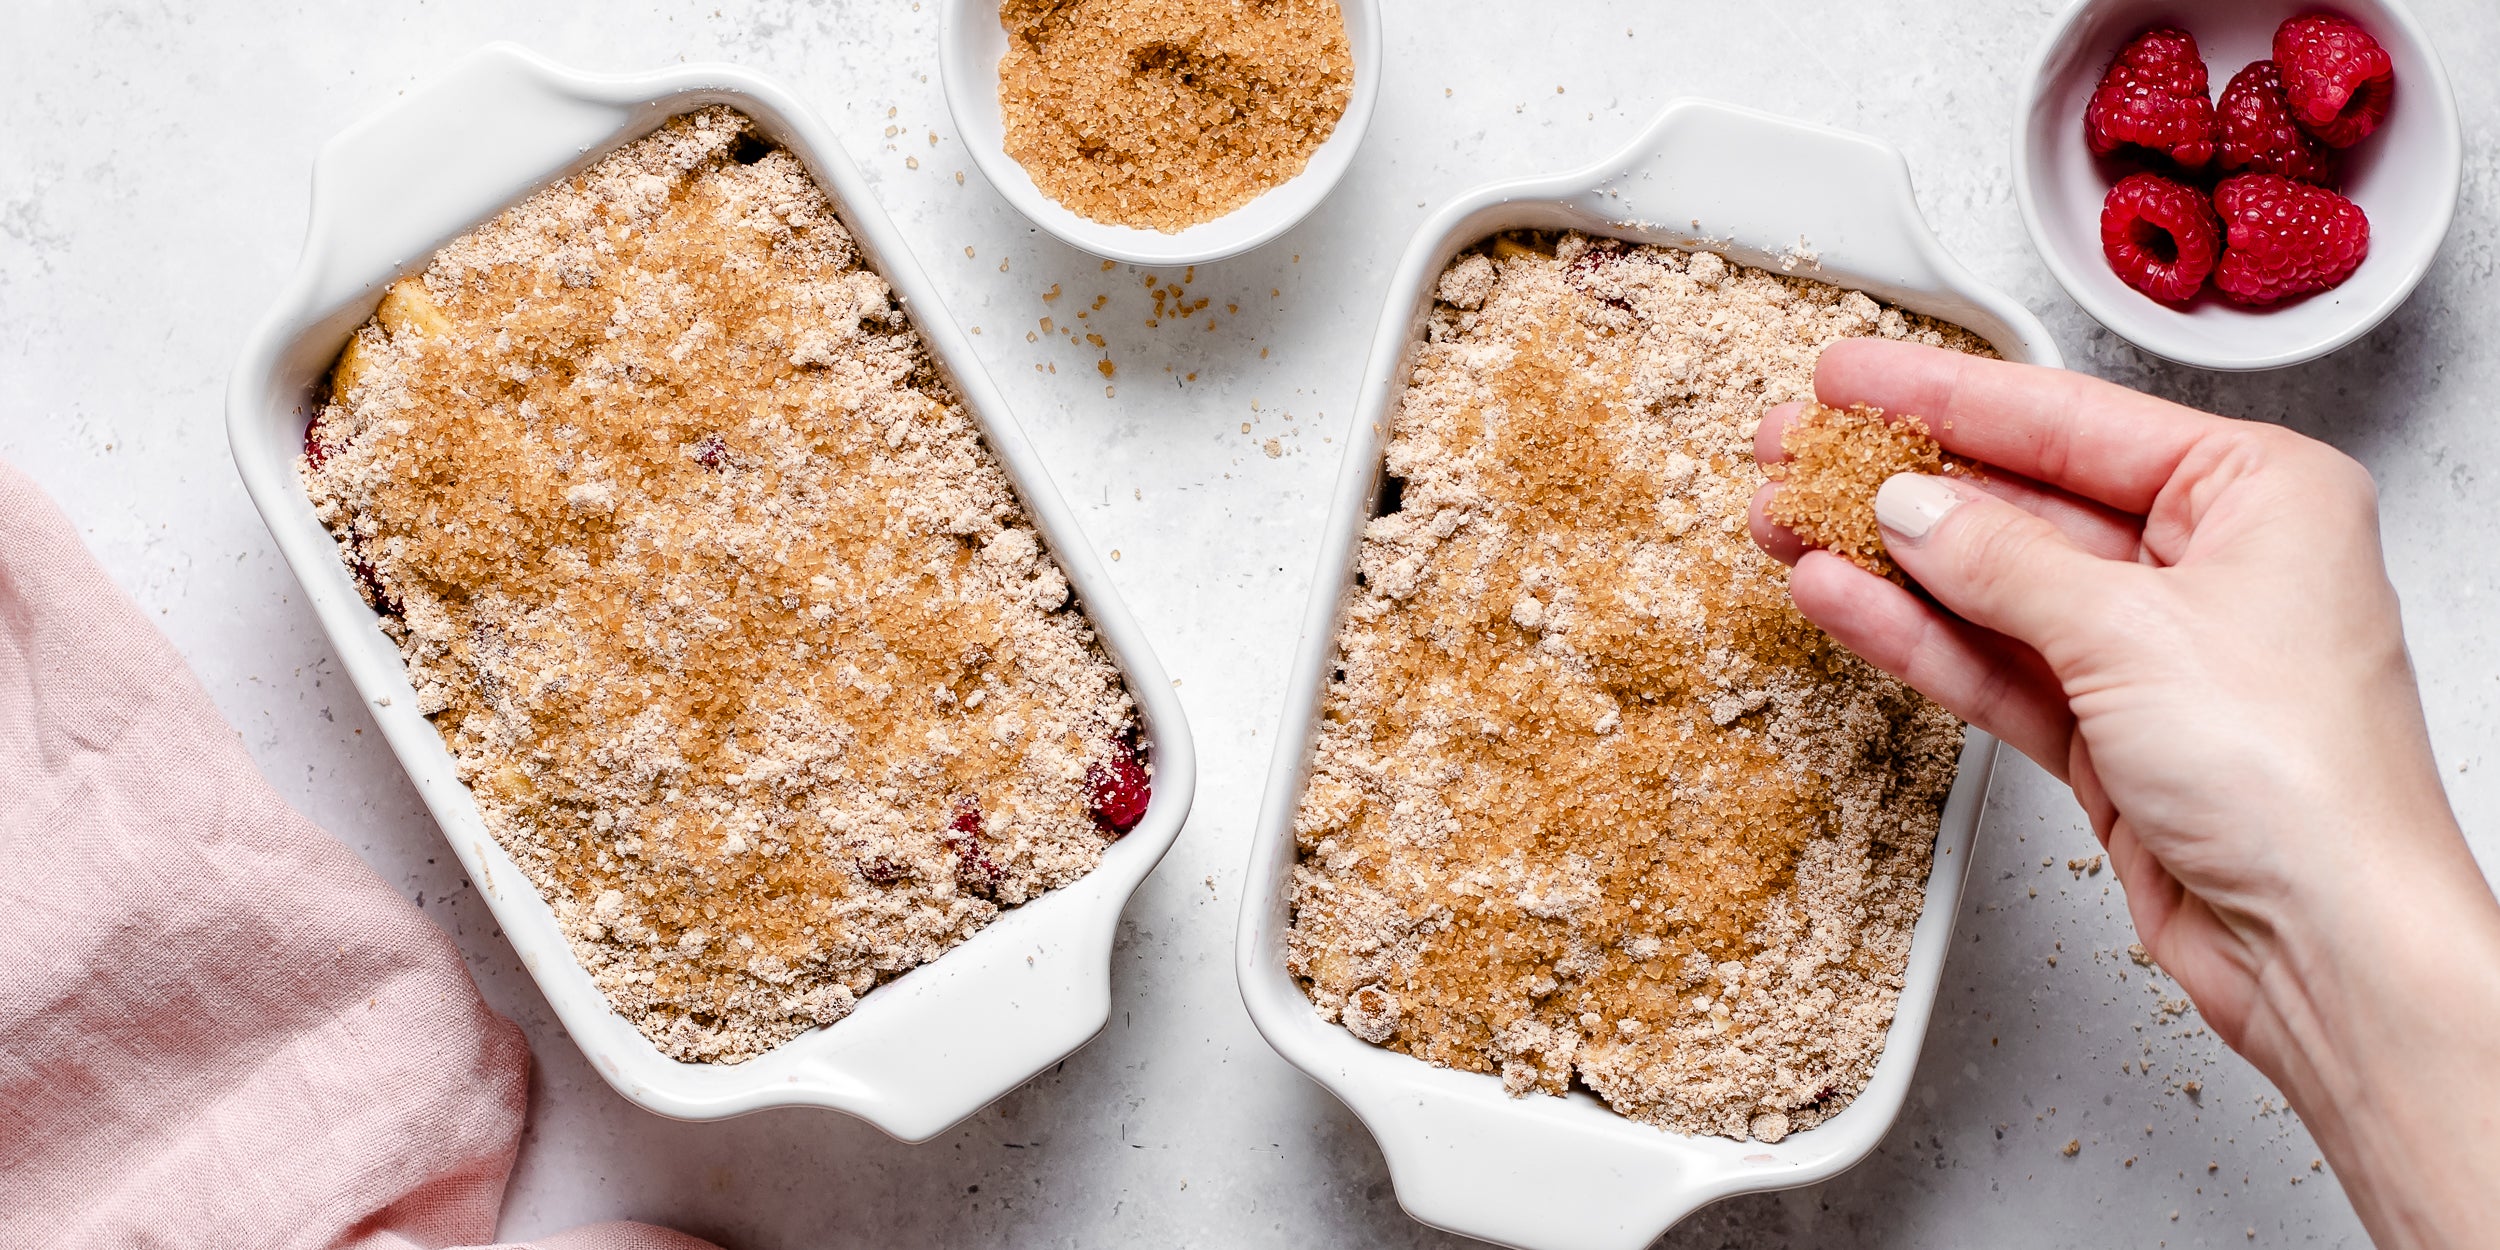 Apple & Raspberry Crumbles being hand sprinkled with golden sugar for a crunchy top 